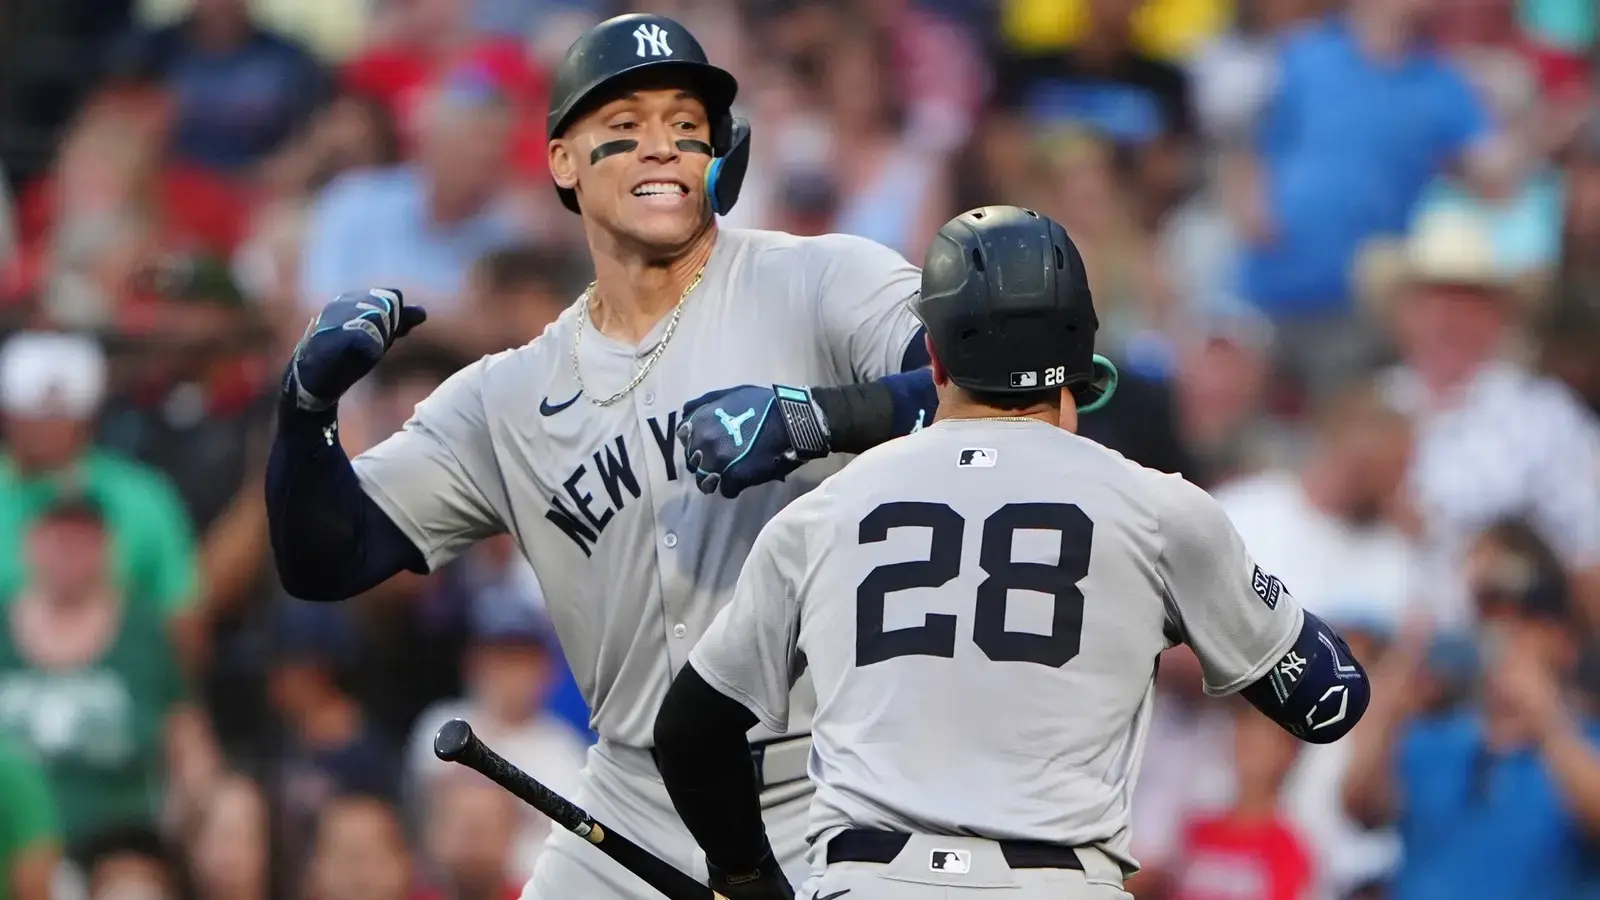 Yankees rally with three runs in 10th inning against Red Sox, win 11-8